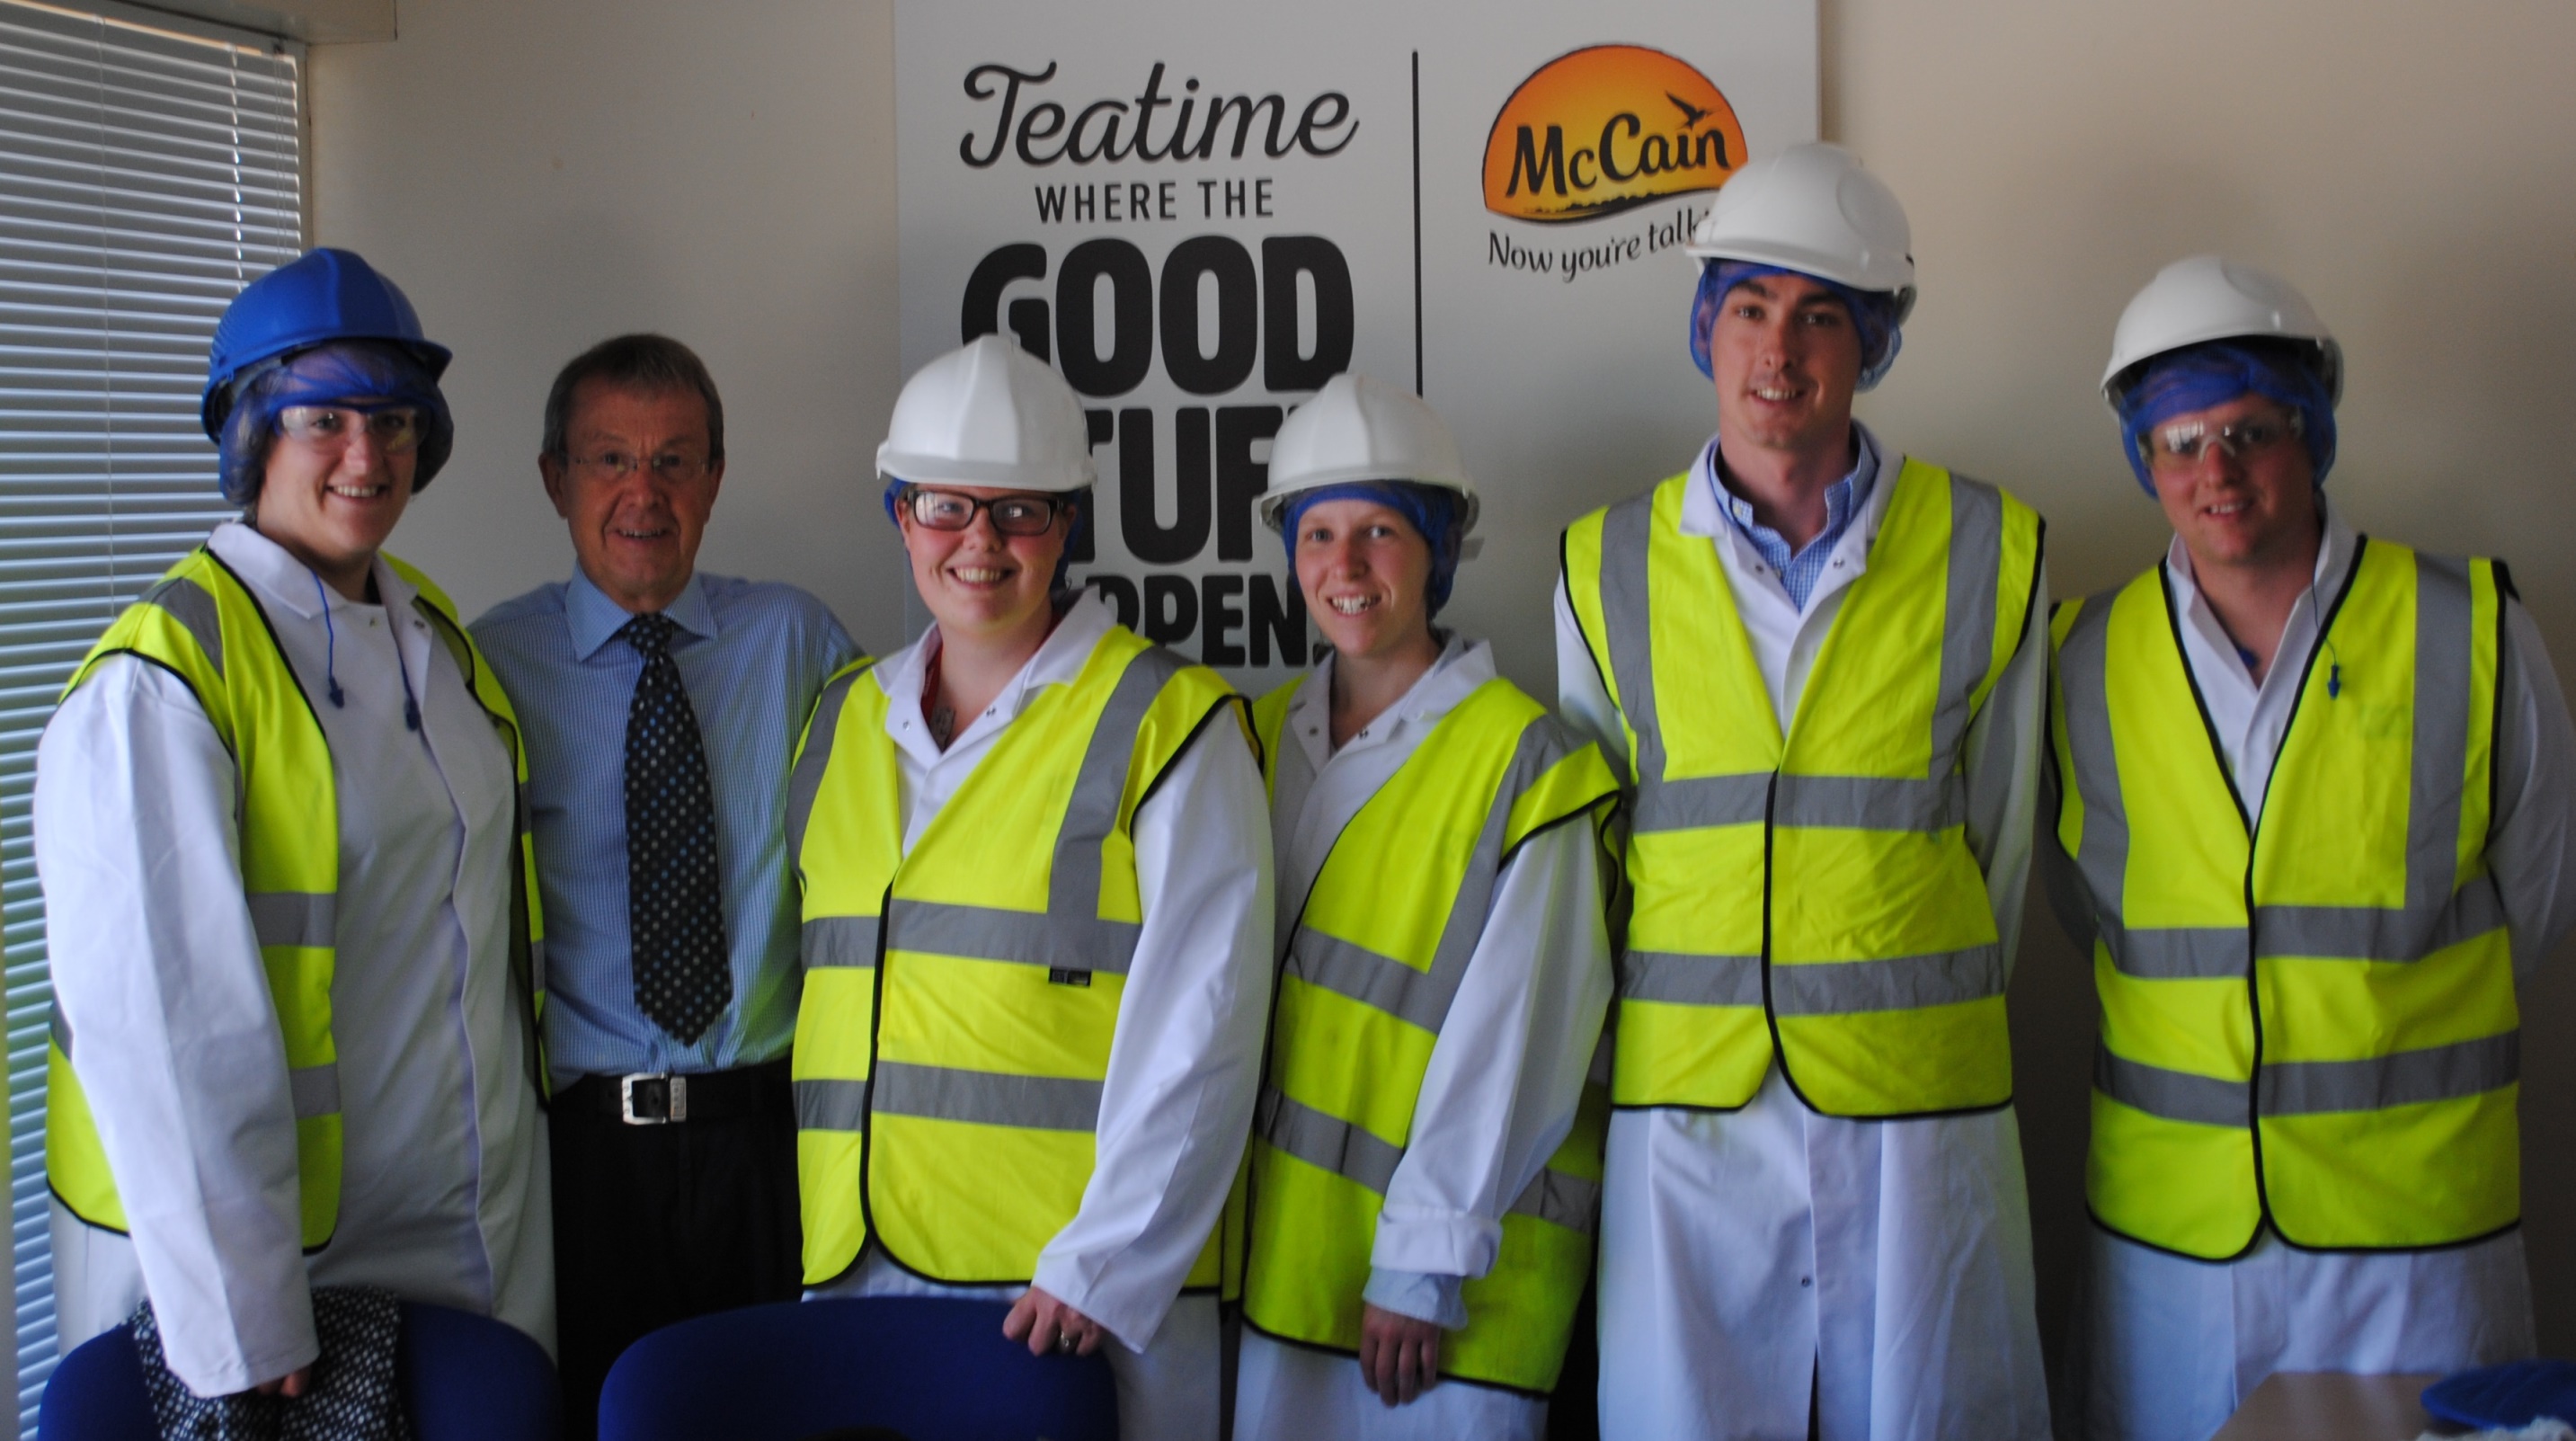 As the largest UK purchaser of potatoes, McCain utilises 15% of the annual crop to supply its French fry and potato speciality production lines in the UK